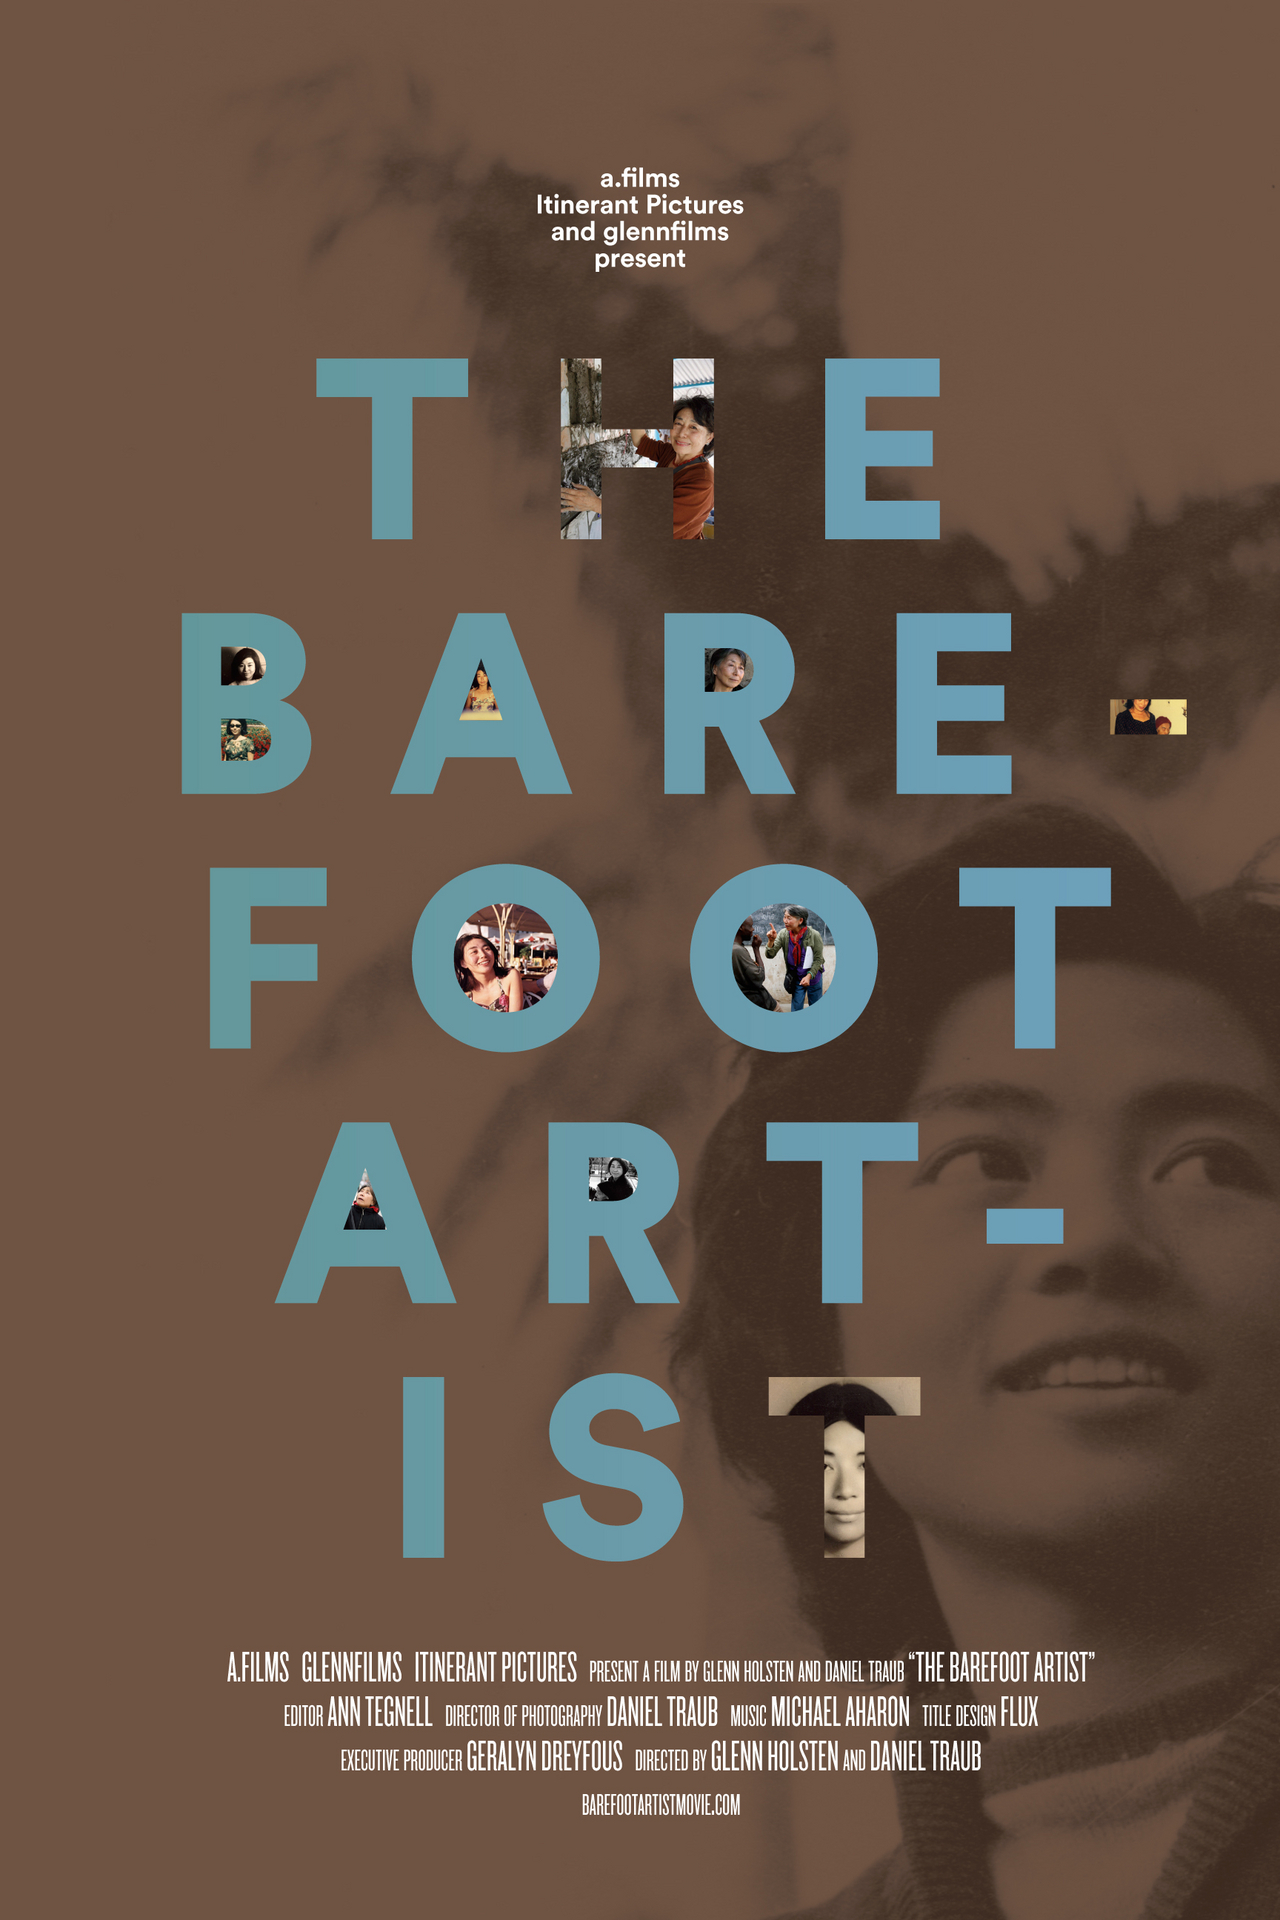 THE BAREFOOT ARTIST Opens in NYC on December 5 and in LA on December 18; National Release To Follow 1 Opens NY on December 5 at the IFC Center